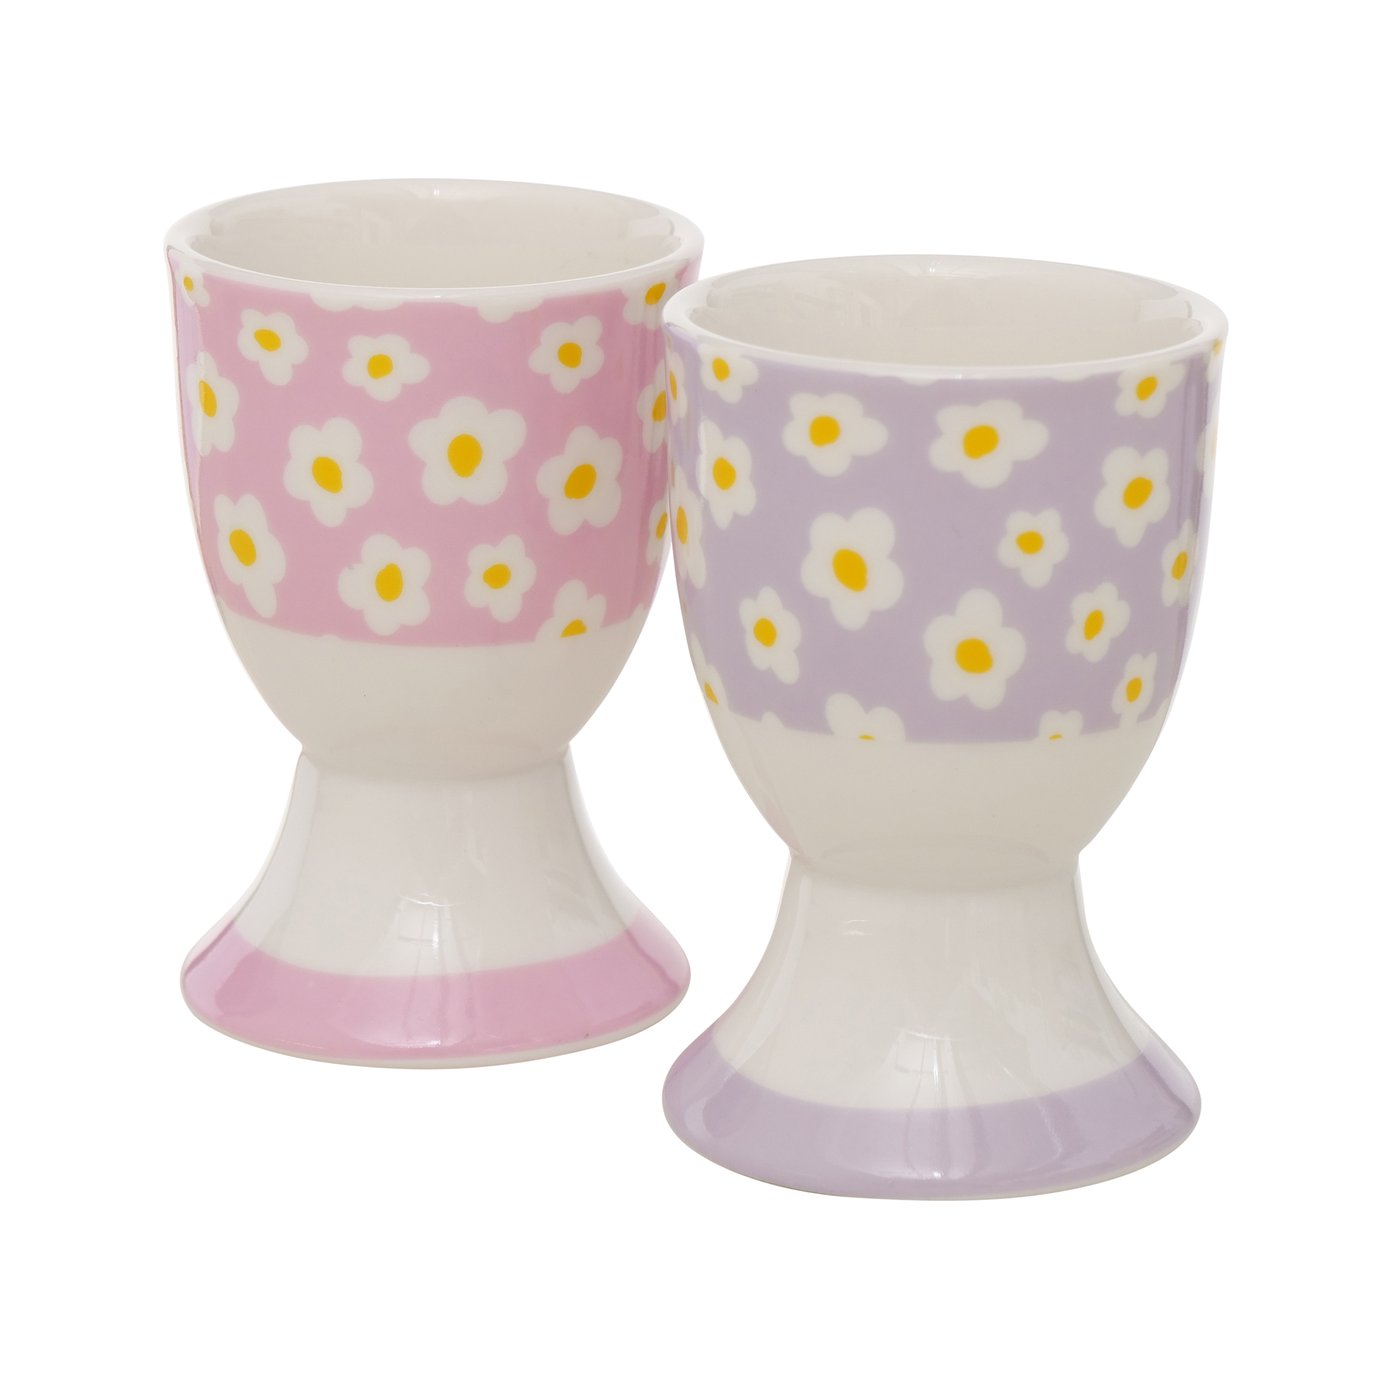 &Quirky Flower Egg Cup : Pink or Purple